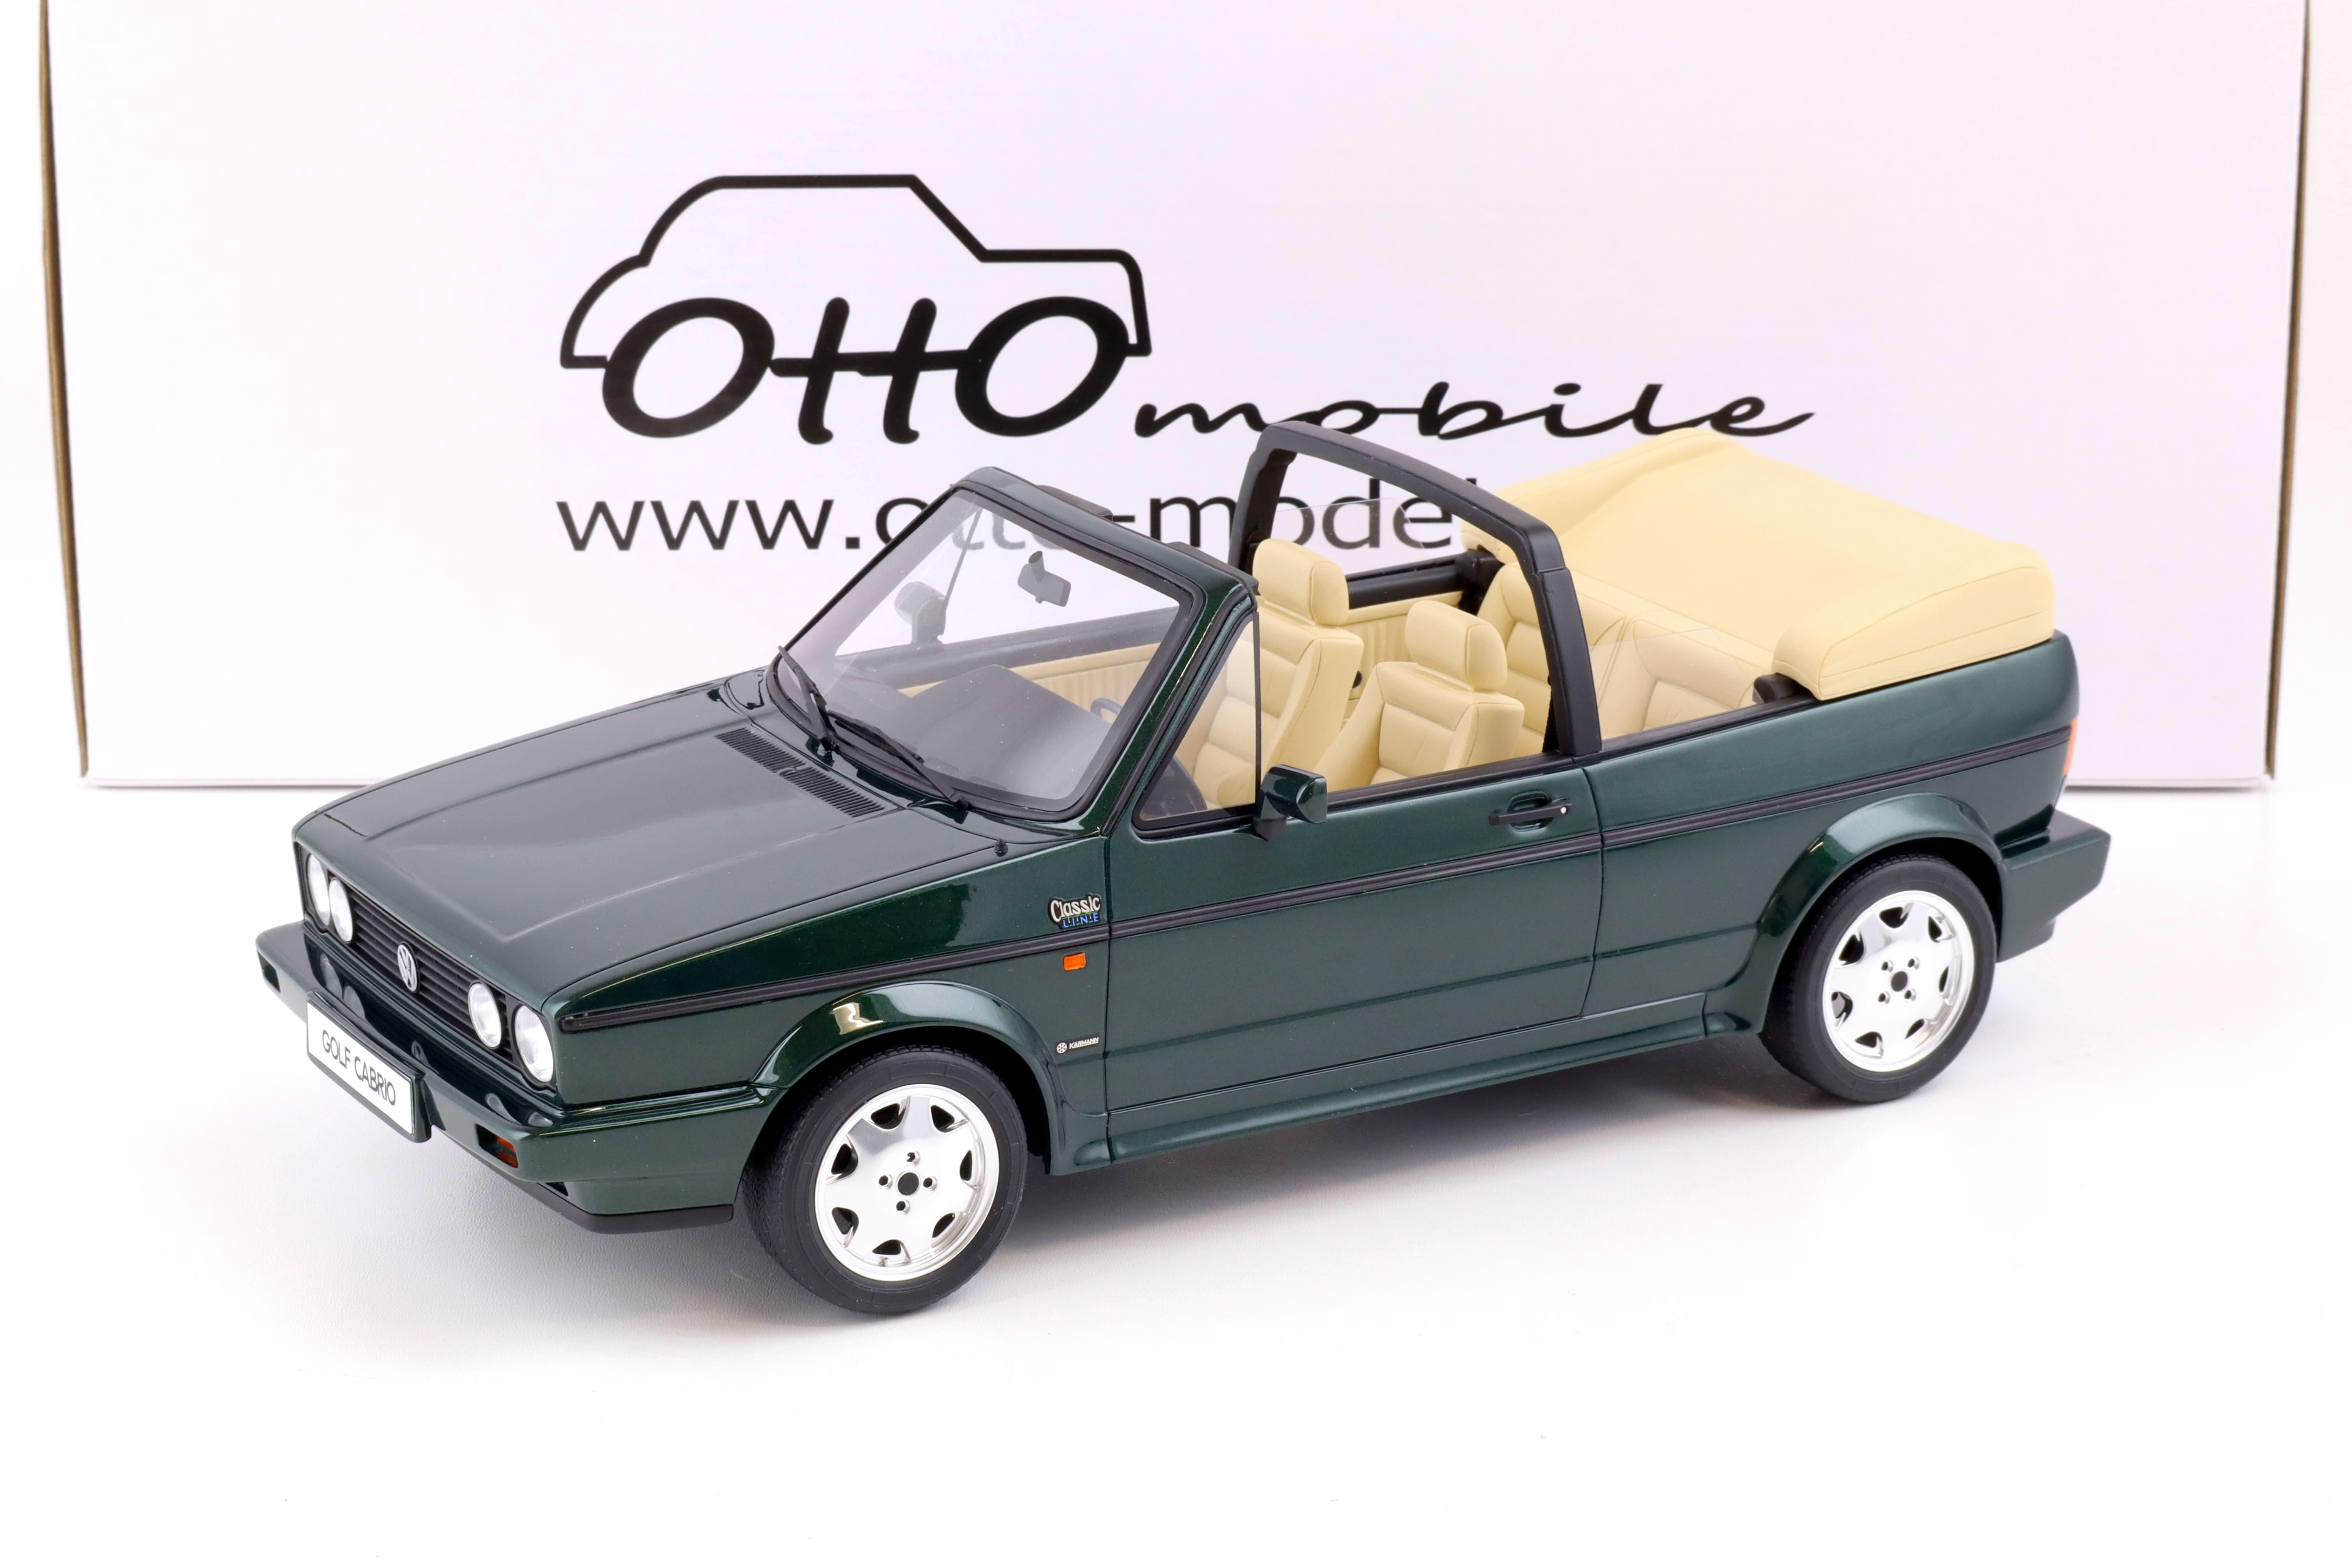 1:12 OTTO mobile G036 VW Golf 1 MK1 Cabriolet Classic Line 1992 green